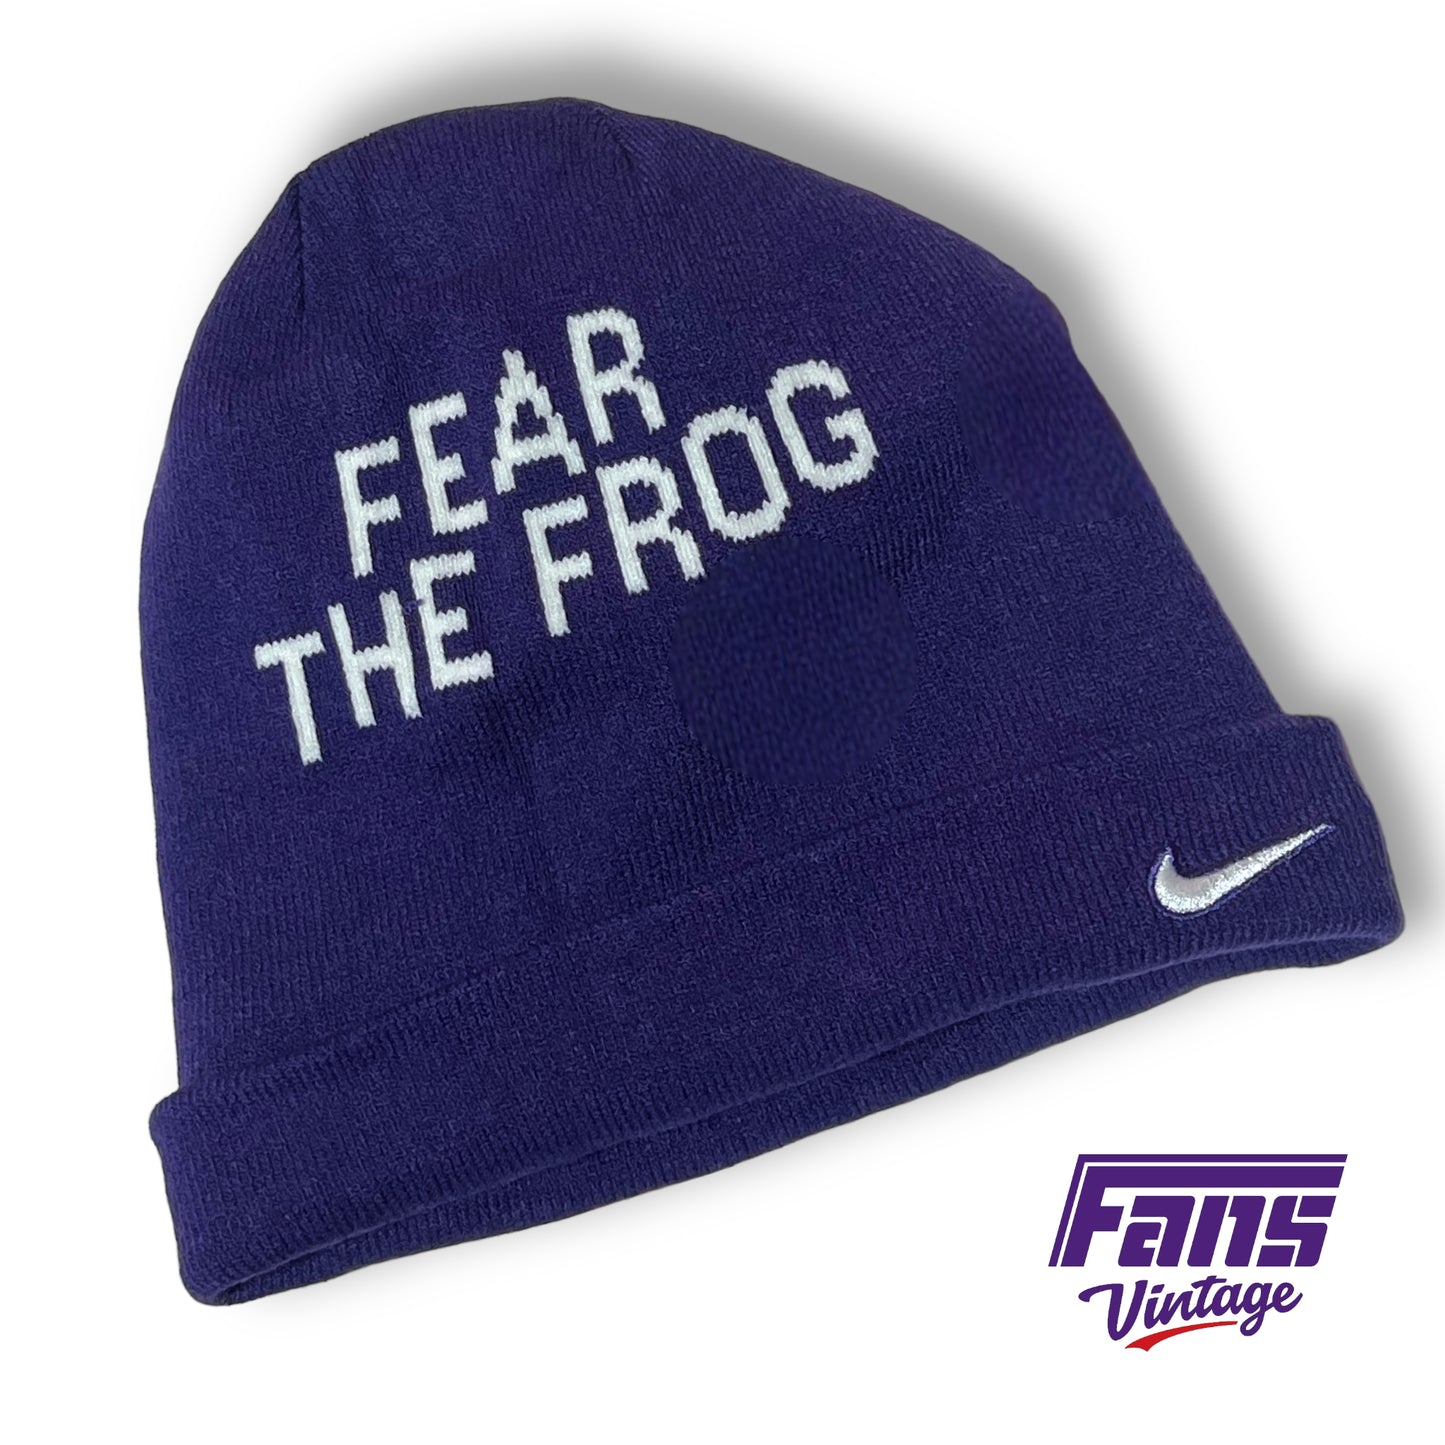 TCU Football Team-Issued Reversible Nike Beanie with Removable Pom - New with tags!